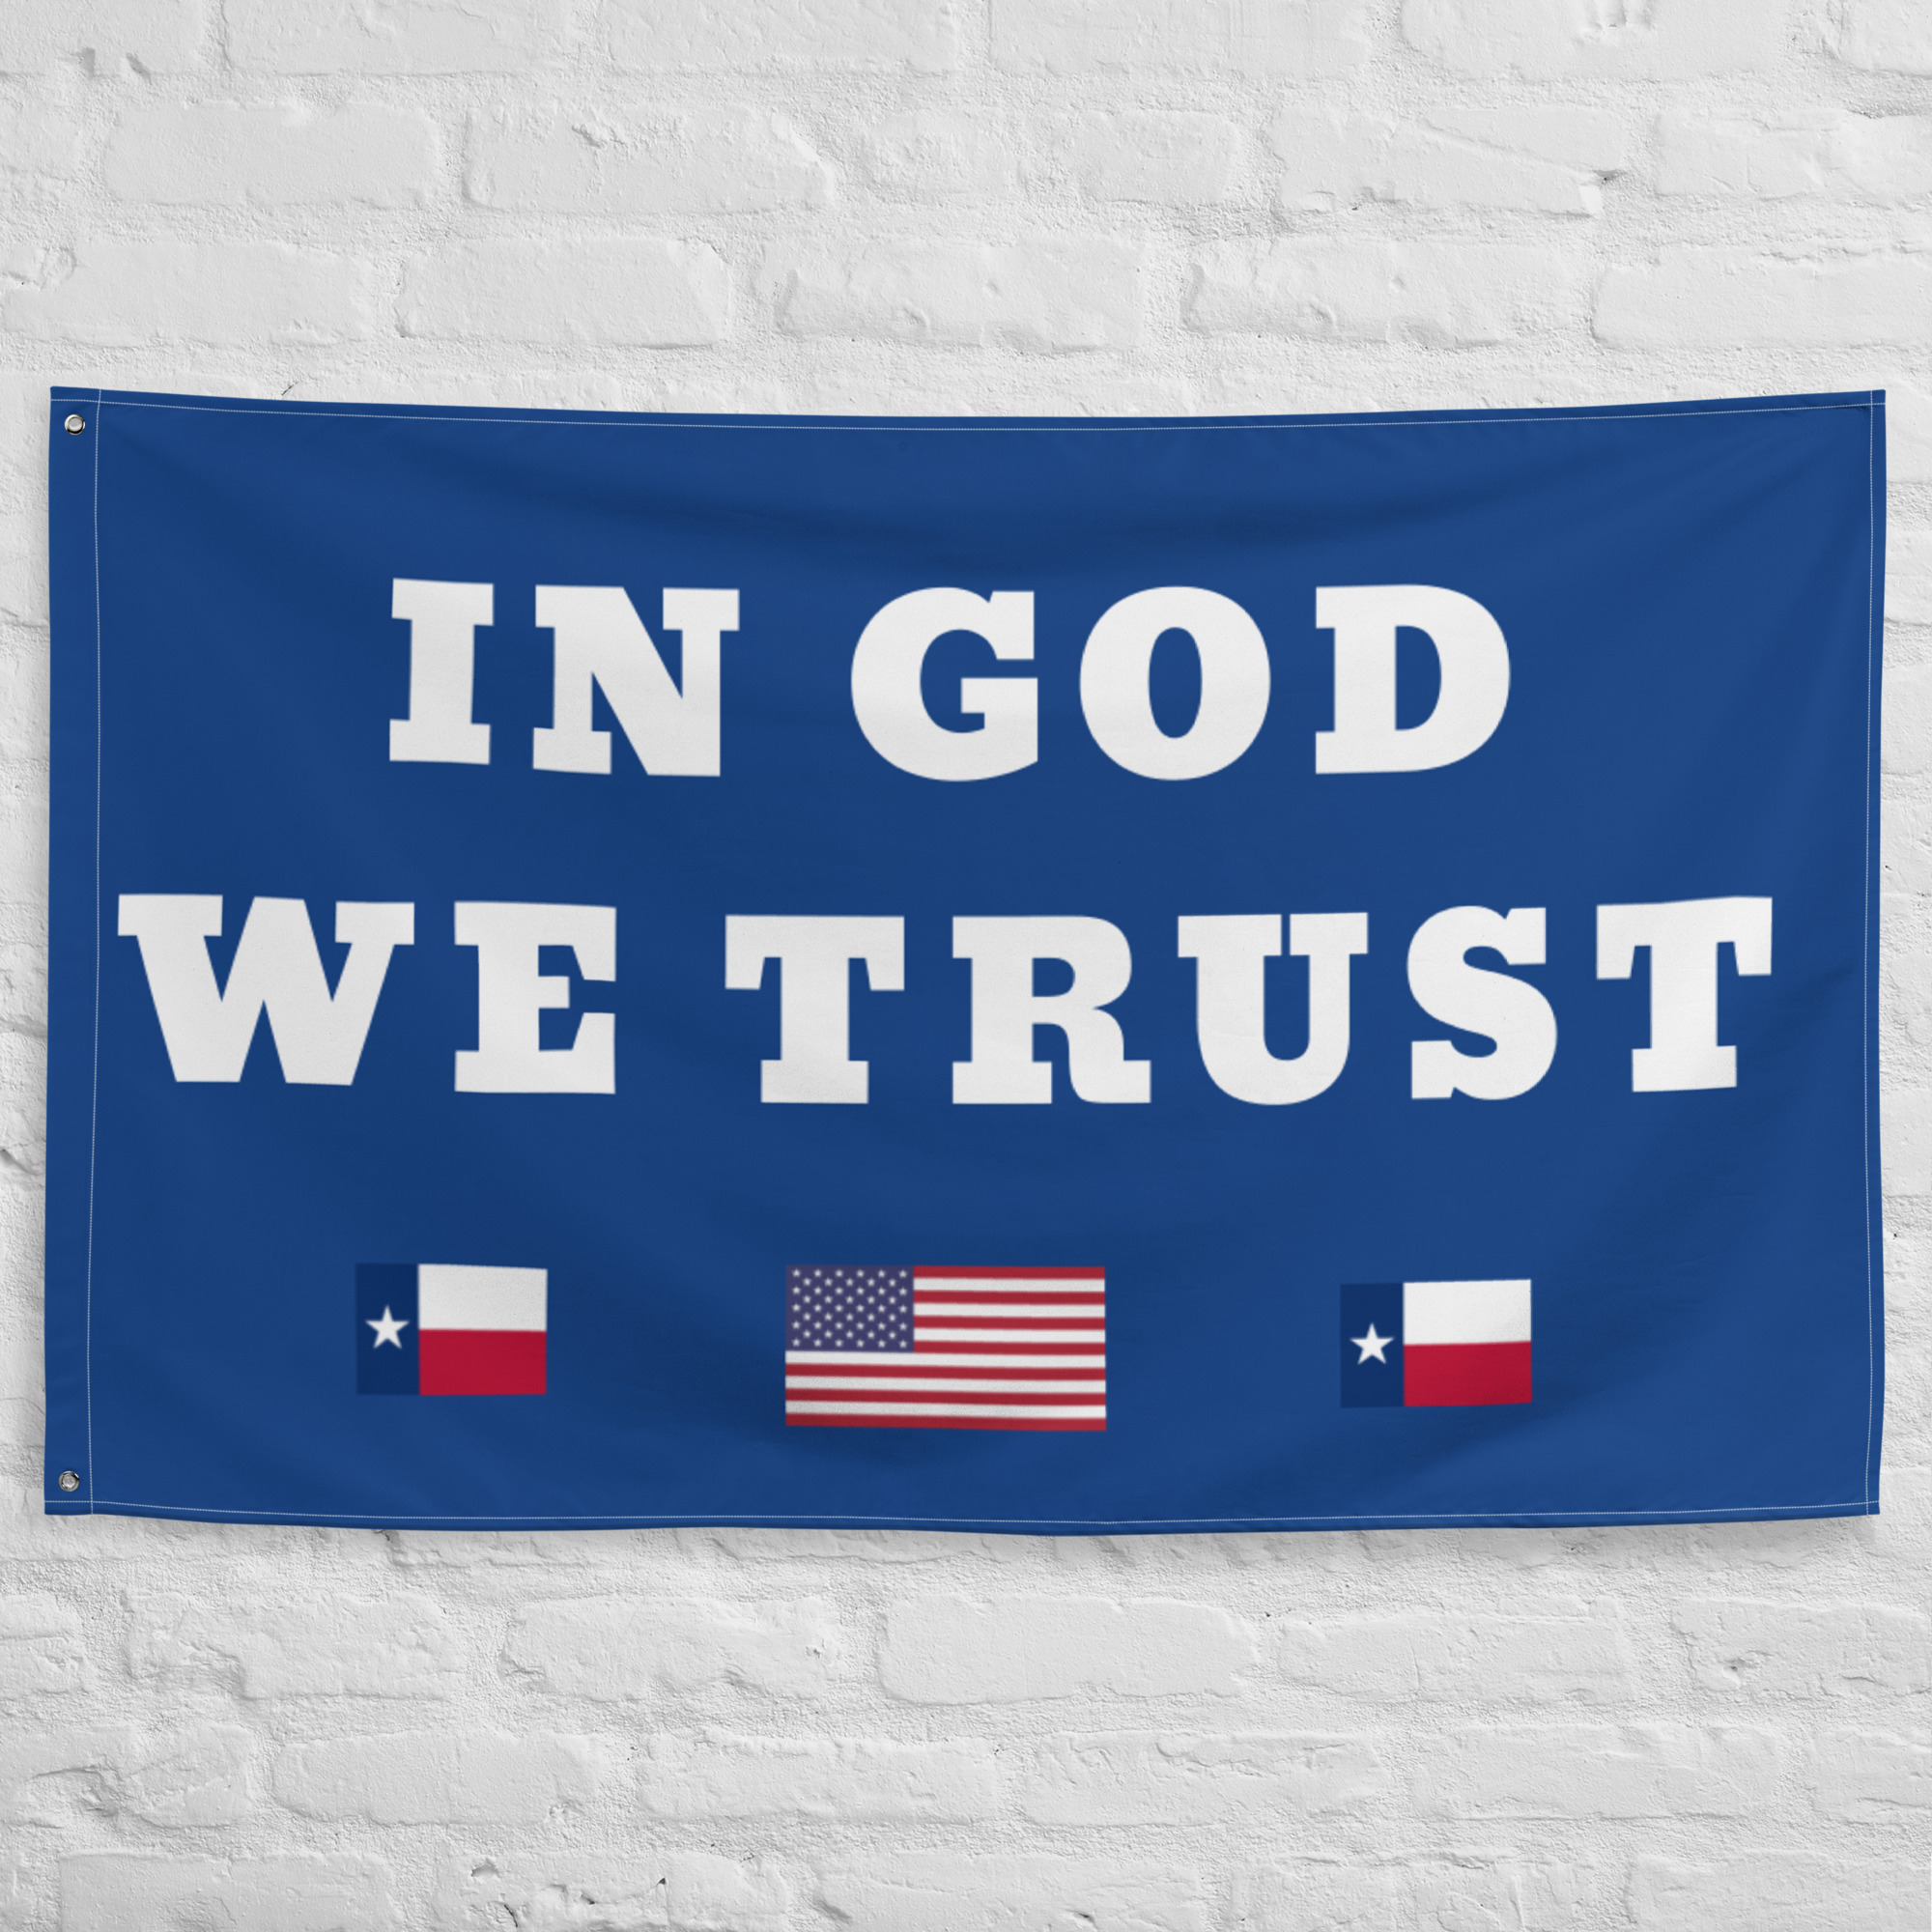 IN GOD WE TRUST #Texas Flag Donate it to your School District